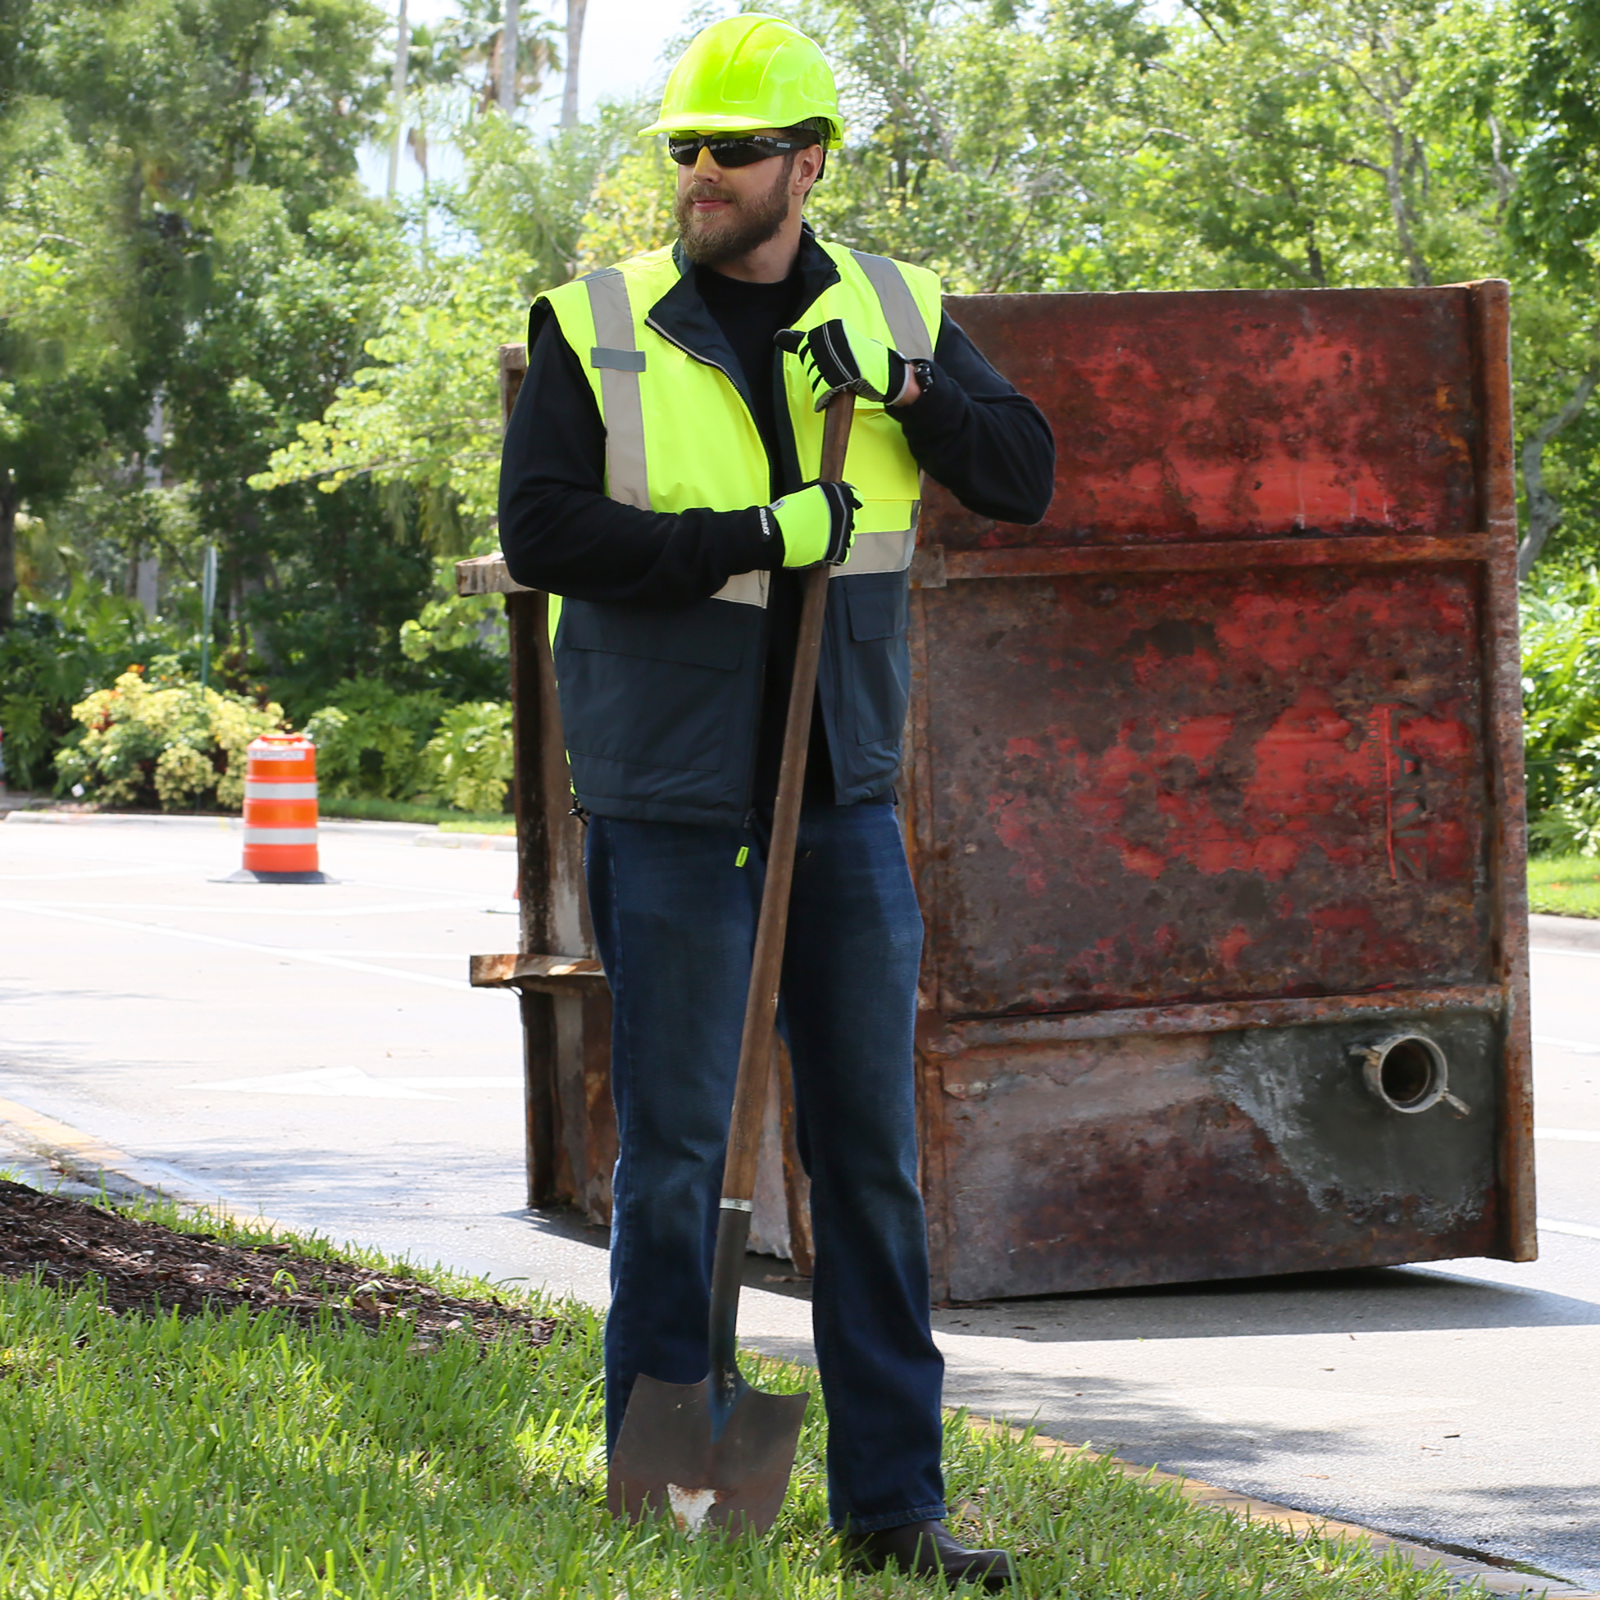 Man wearing the reflective safety vest while he is in a road construction or repair